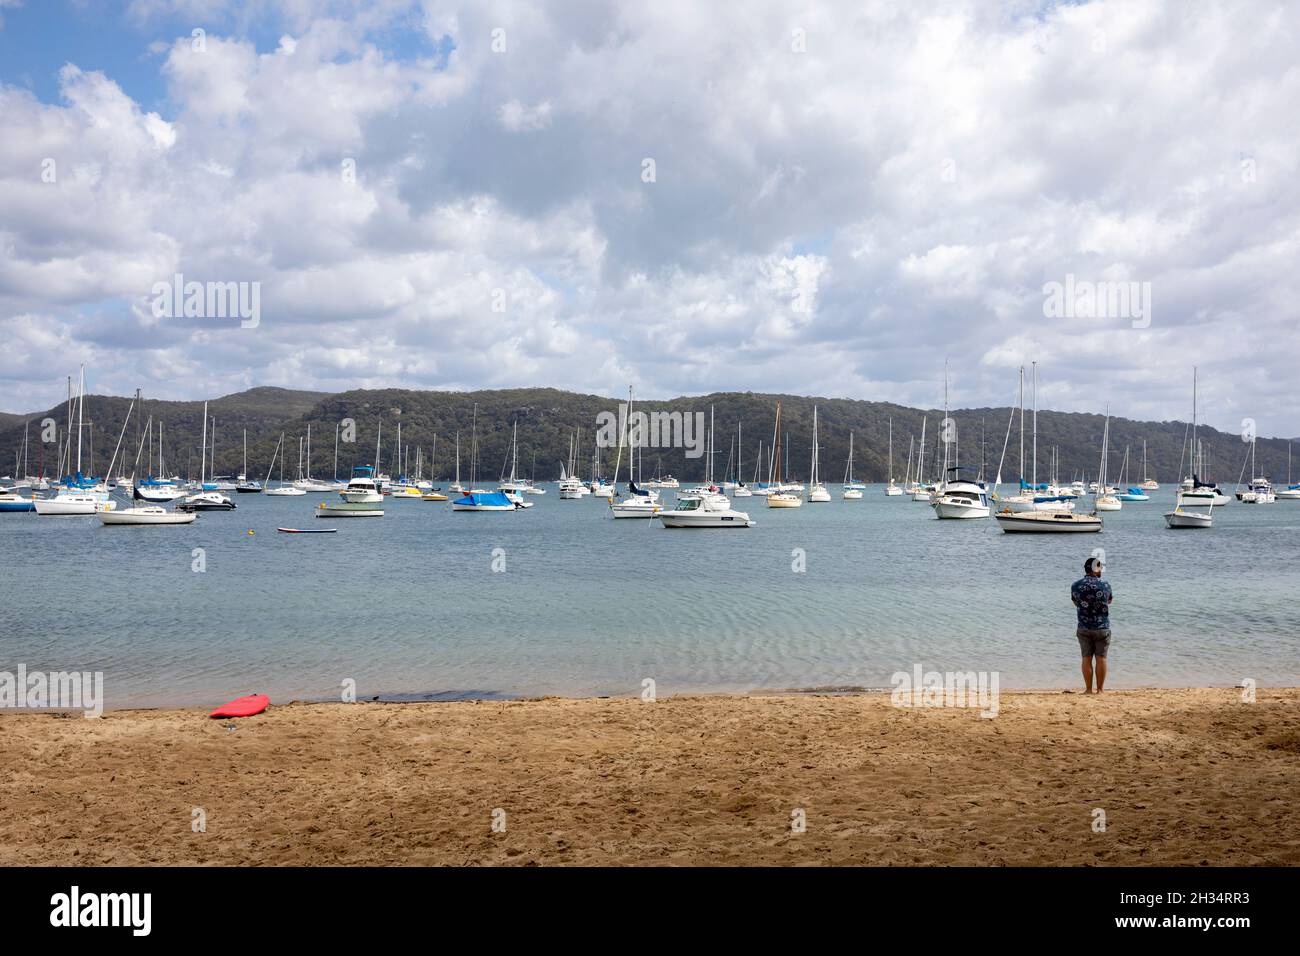 Clareville beach in Sydney with view of boats on Pittwater and across to Ku ring Gai chase national park,Sydney,NSW,Australia Stock Photo